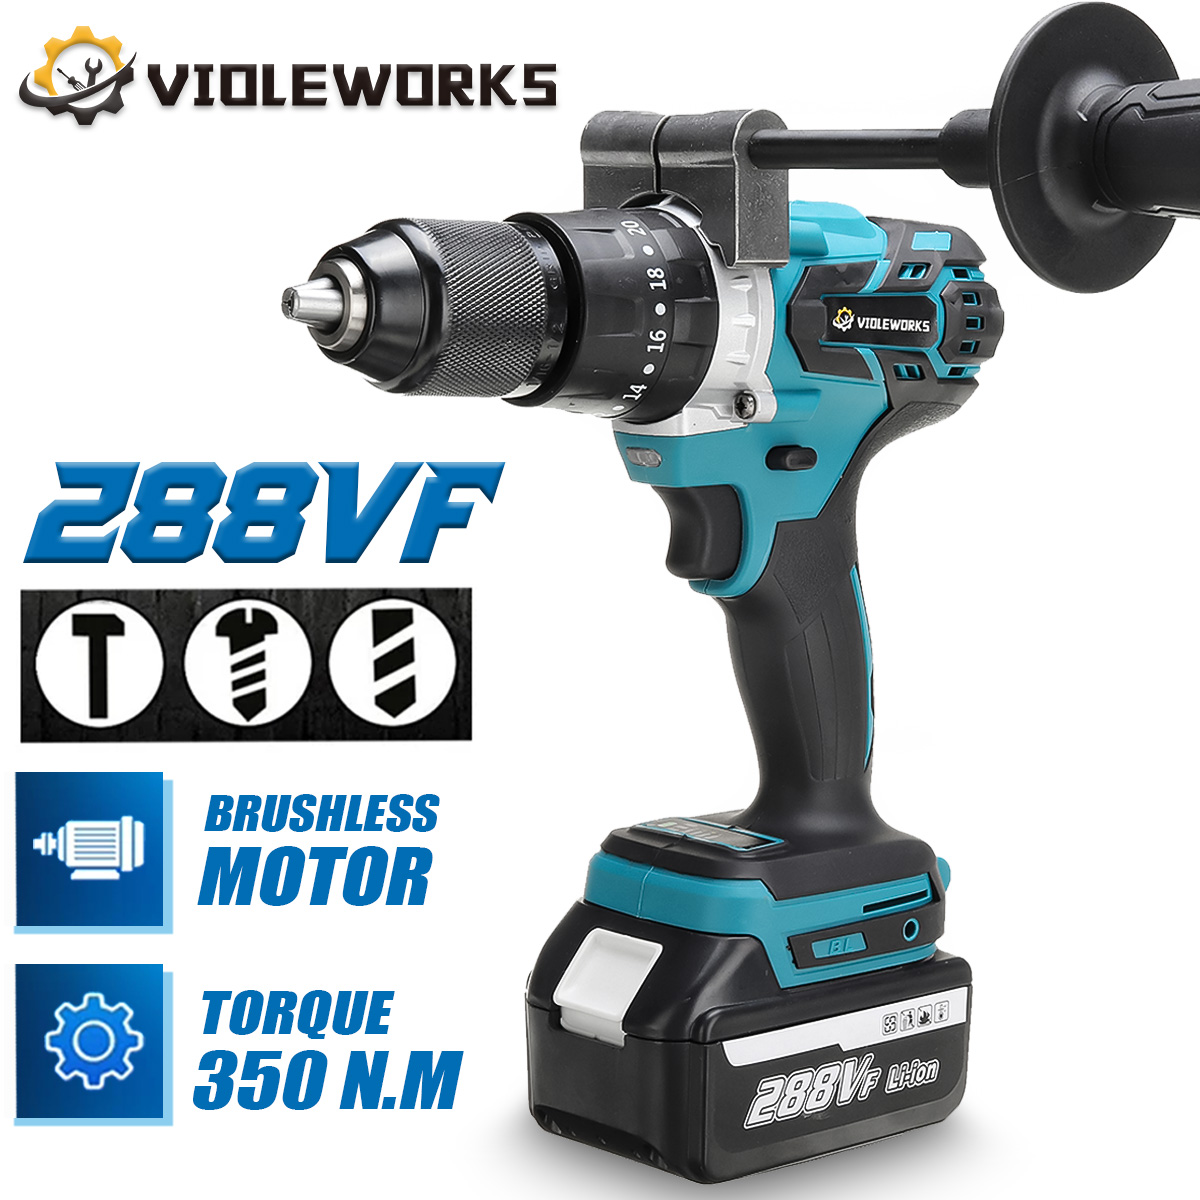 3-IN-1-288VF-Cordless-Drill-Electric-Screwdriver-Hammer-Impact-Drill-203-Torque-W-12pcs-Battery-1847556-1